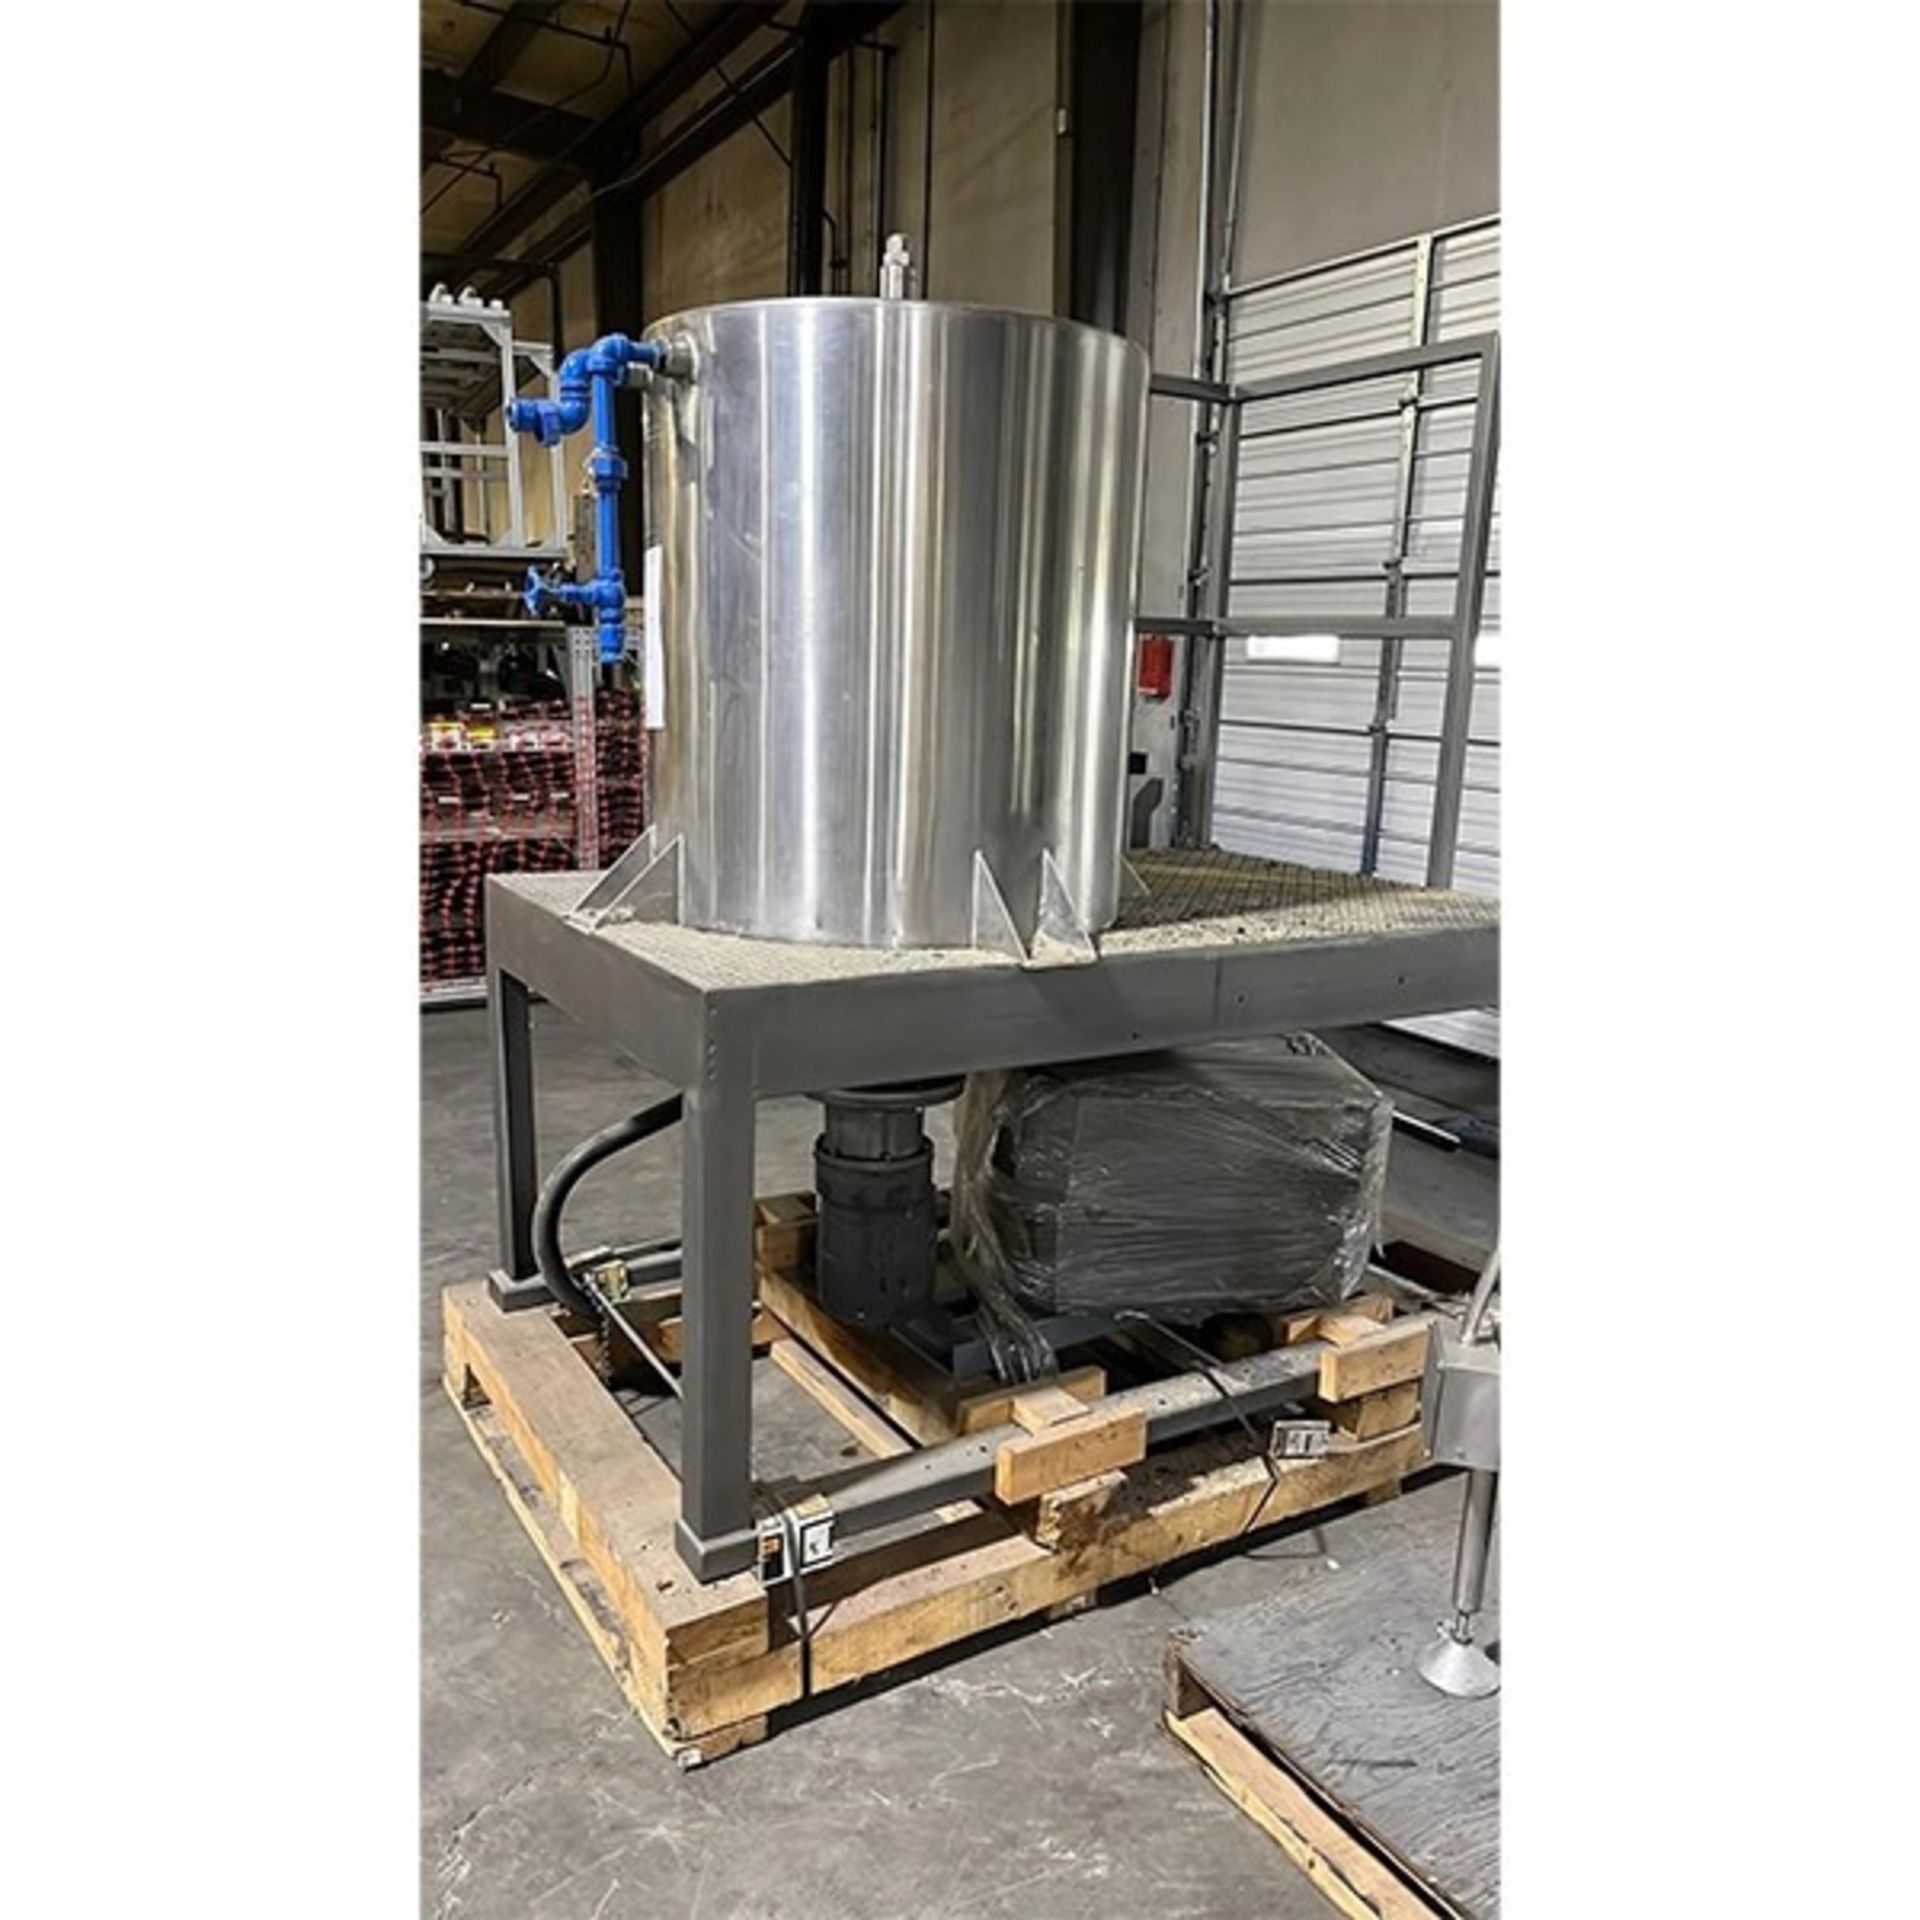 Goodway Continous Mixer includes 175 Litre Batter Holding Tank, S/S Holding Tank that is Jacketed - Image 5 of 5